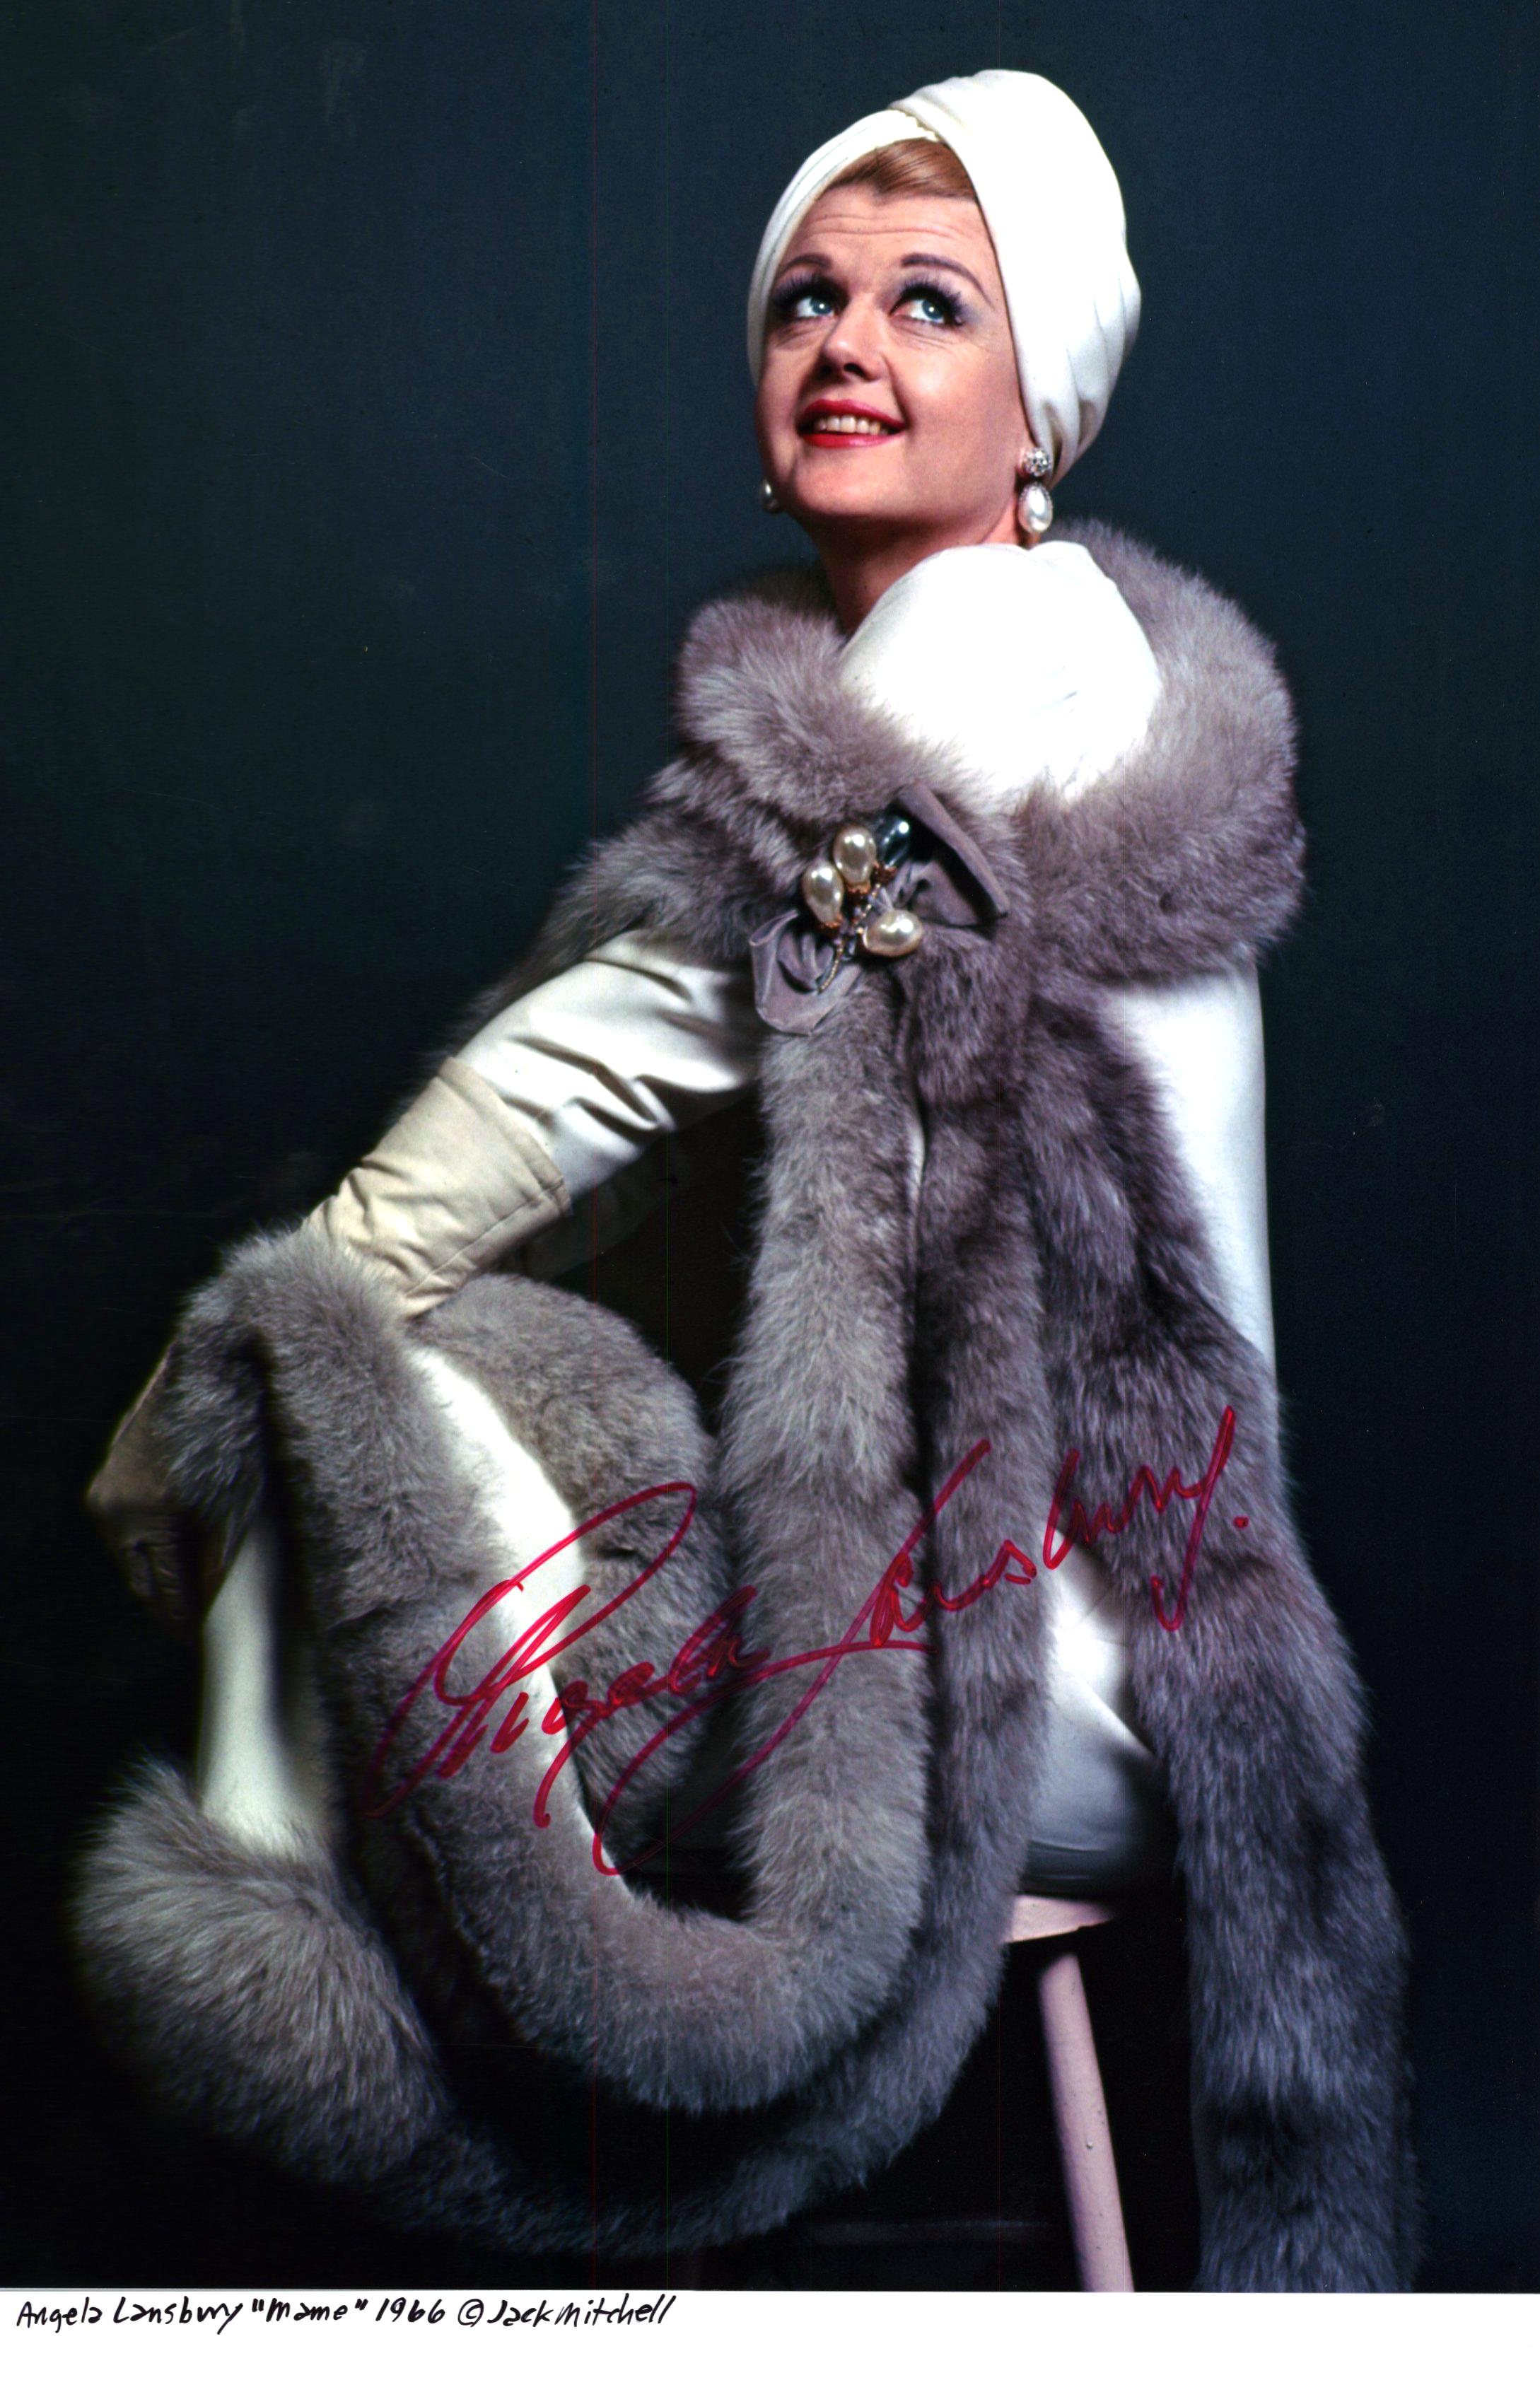 Jack Mitchell Color Photograph - Broadway star Angela Lansbury as 'Mame', signed by Angela Lansbury